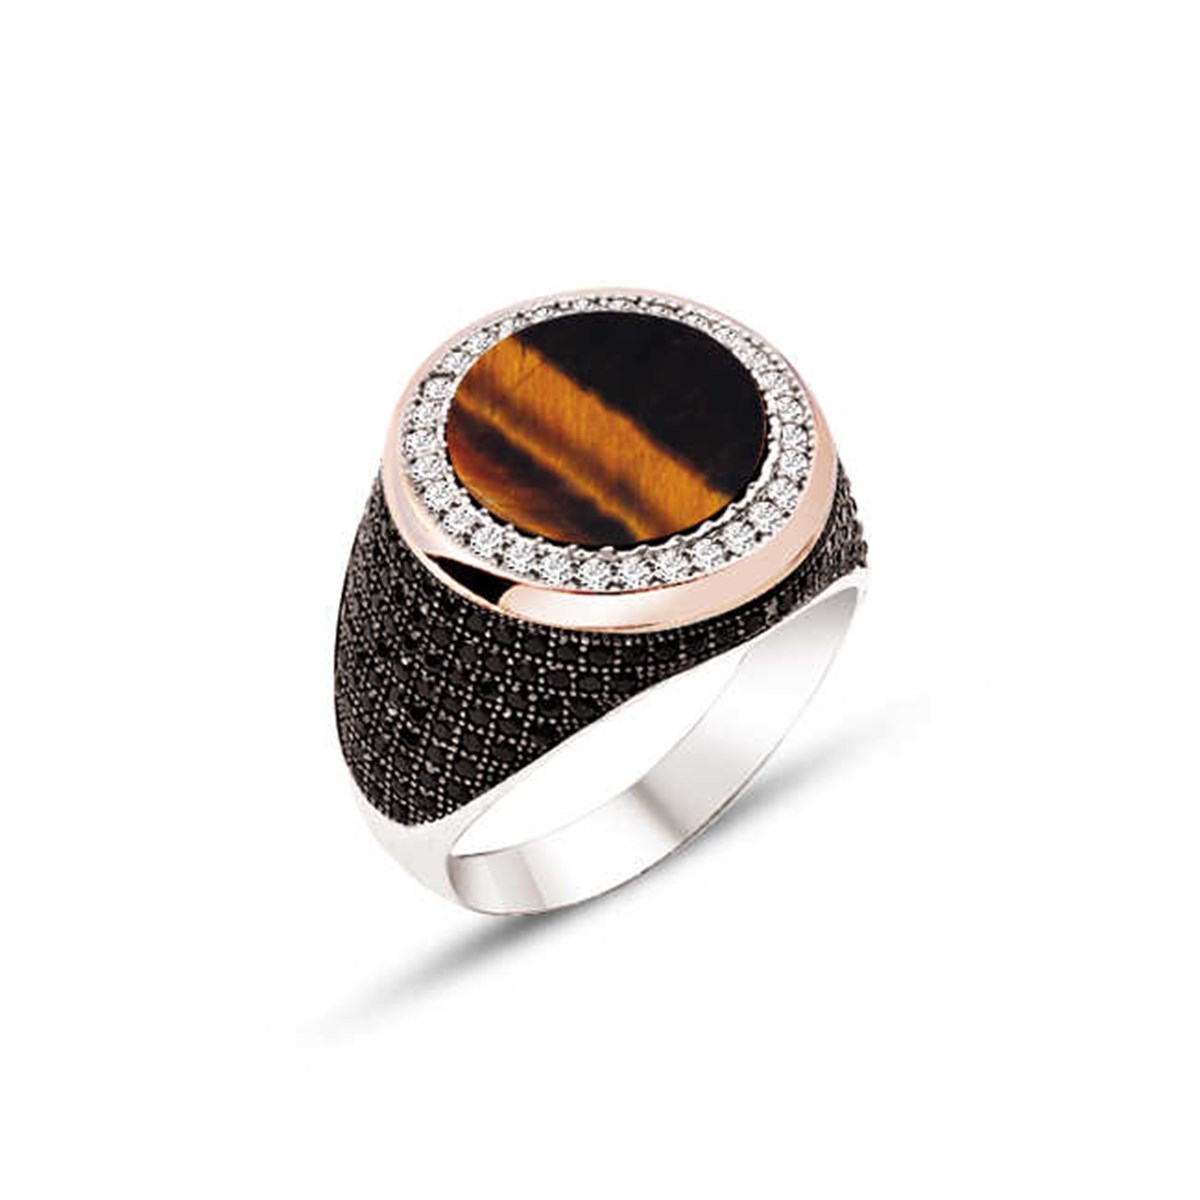 Silver Tiger Eye Stone Embroidered Men's Ring